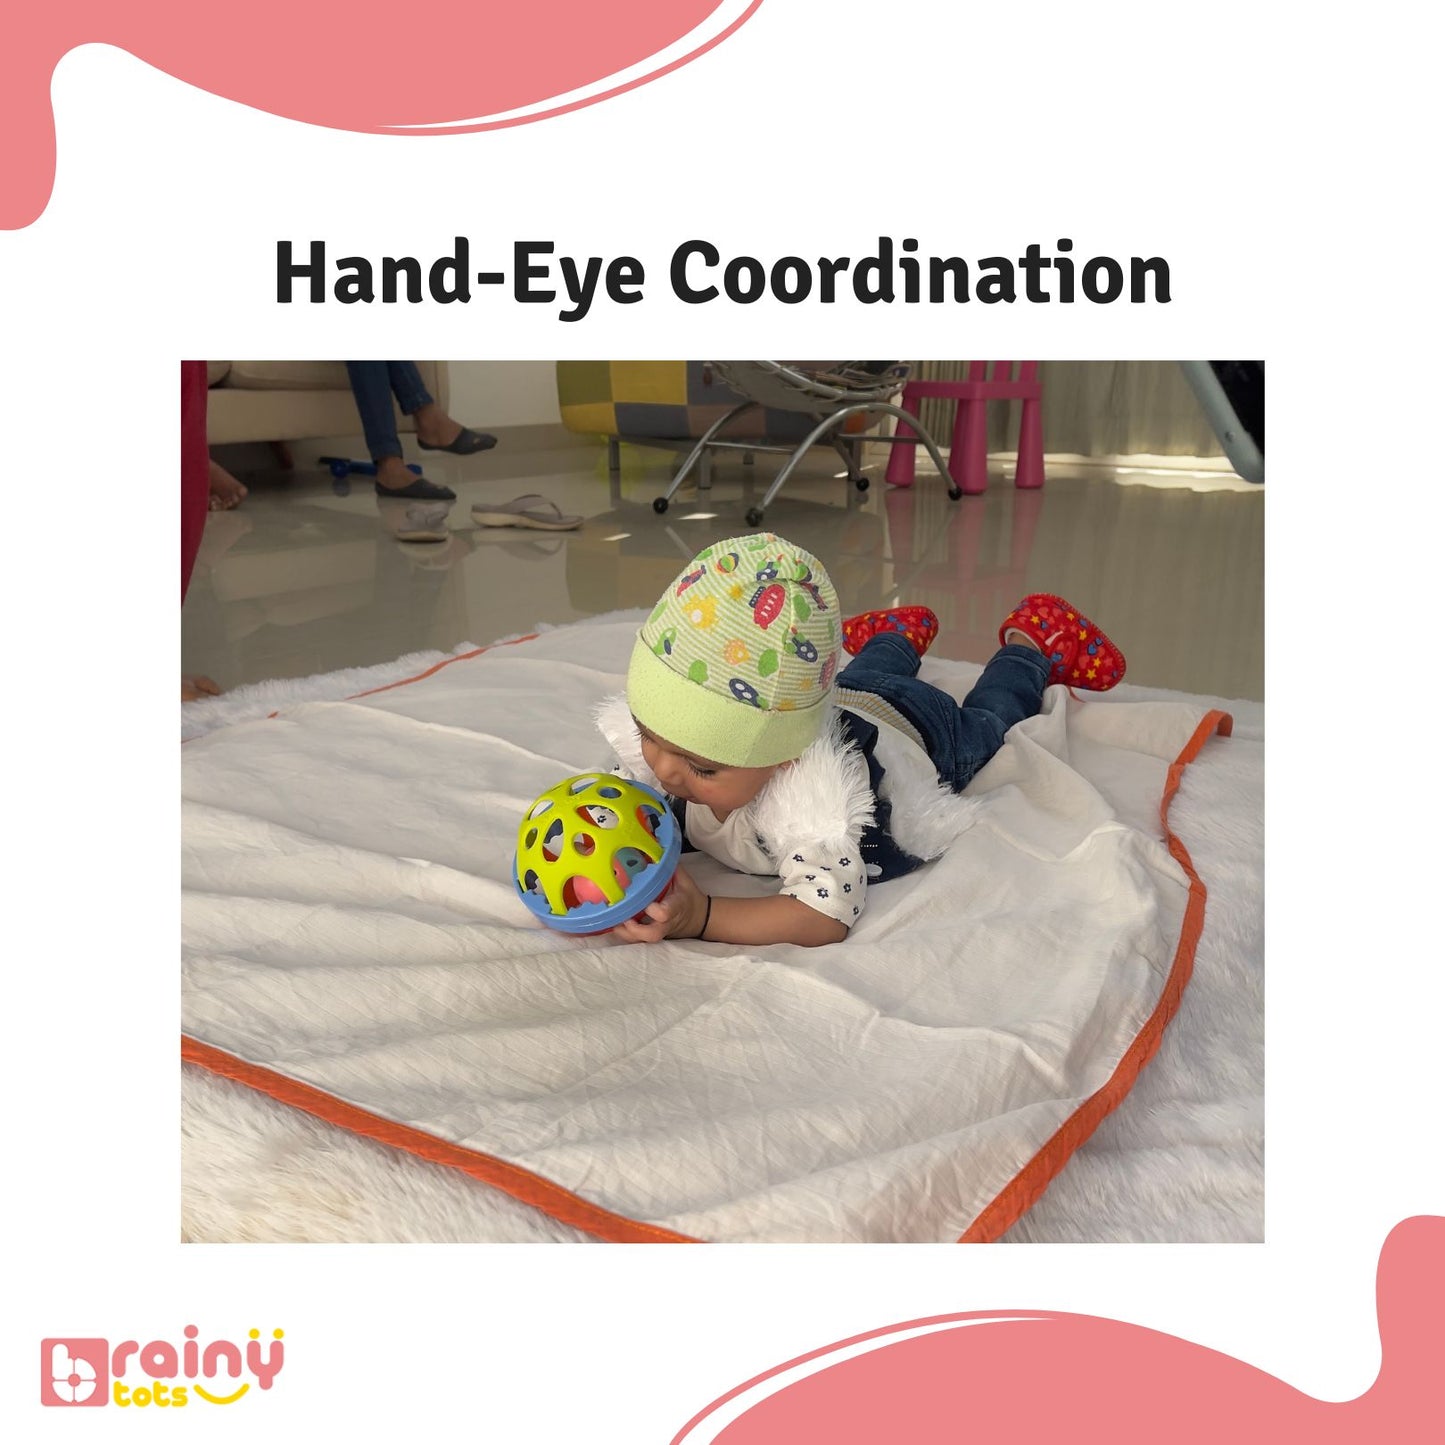 Enhance hand-eye coordination with our O Ball. Designed with dynamic shapes and easy-to-grasp features, this versatile toy encourages infants and toddlers to reach, grab, and manipulate, fostering the development of crucial hand-eye coordination skills essential for early childhood development.